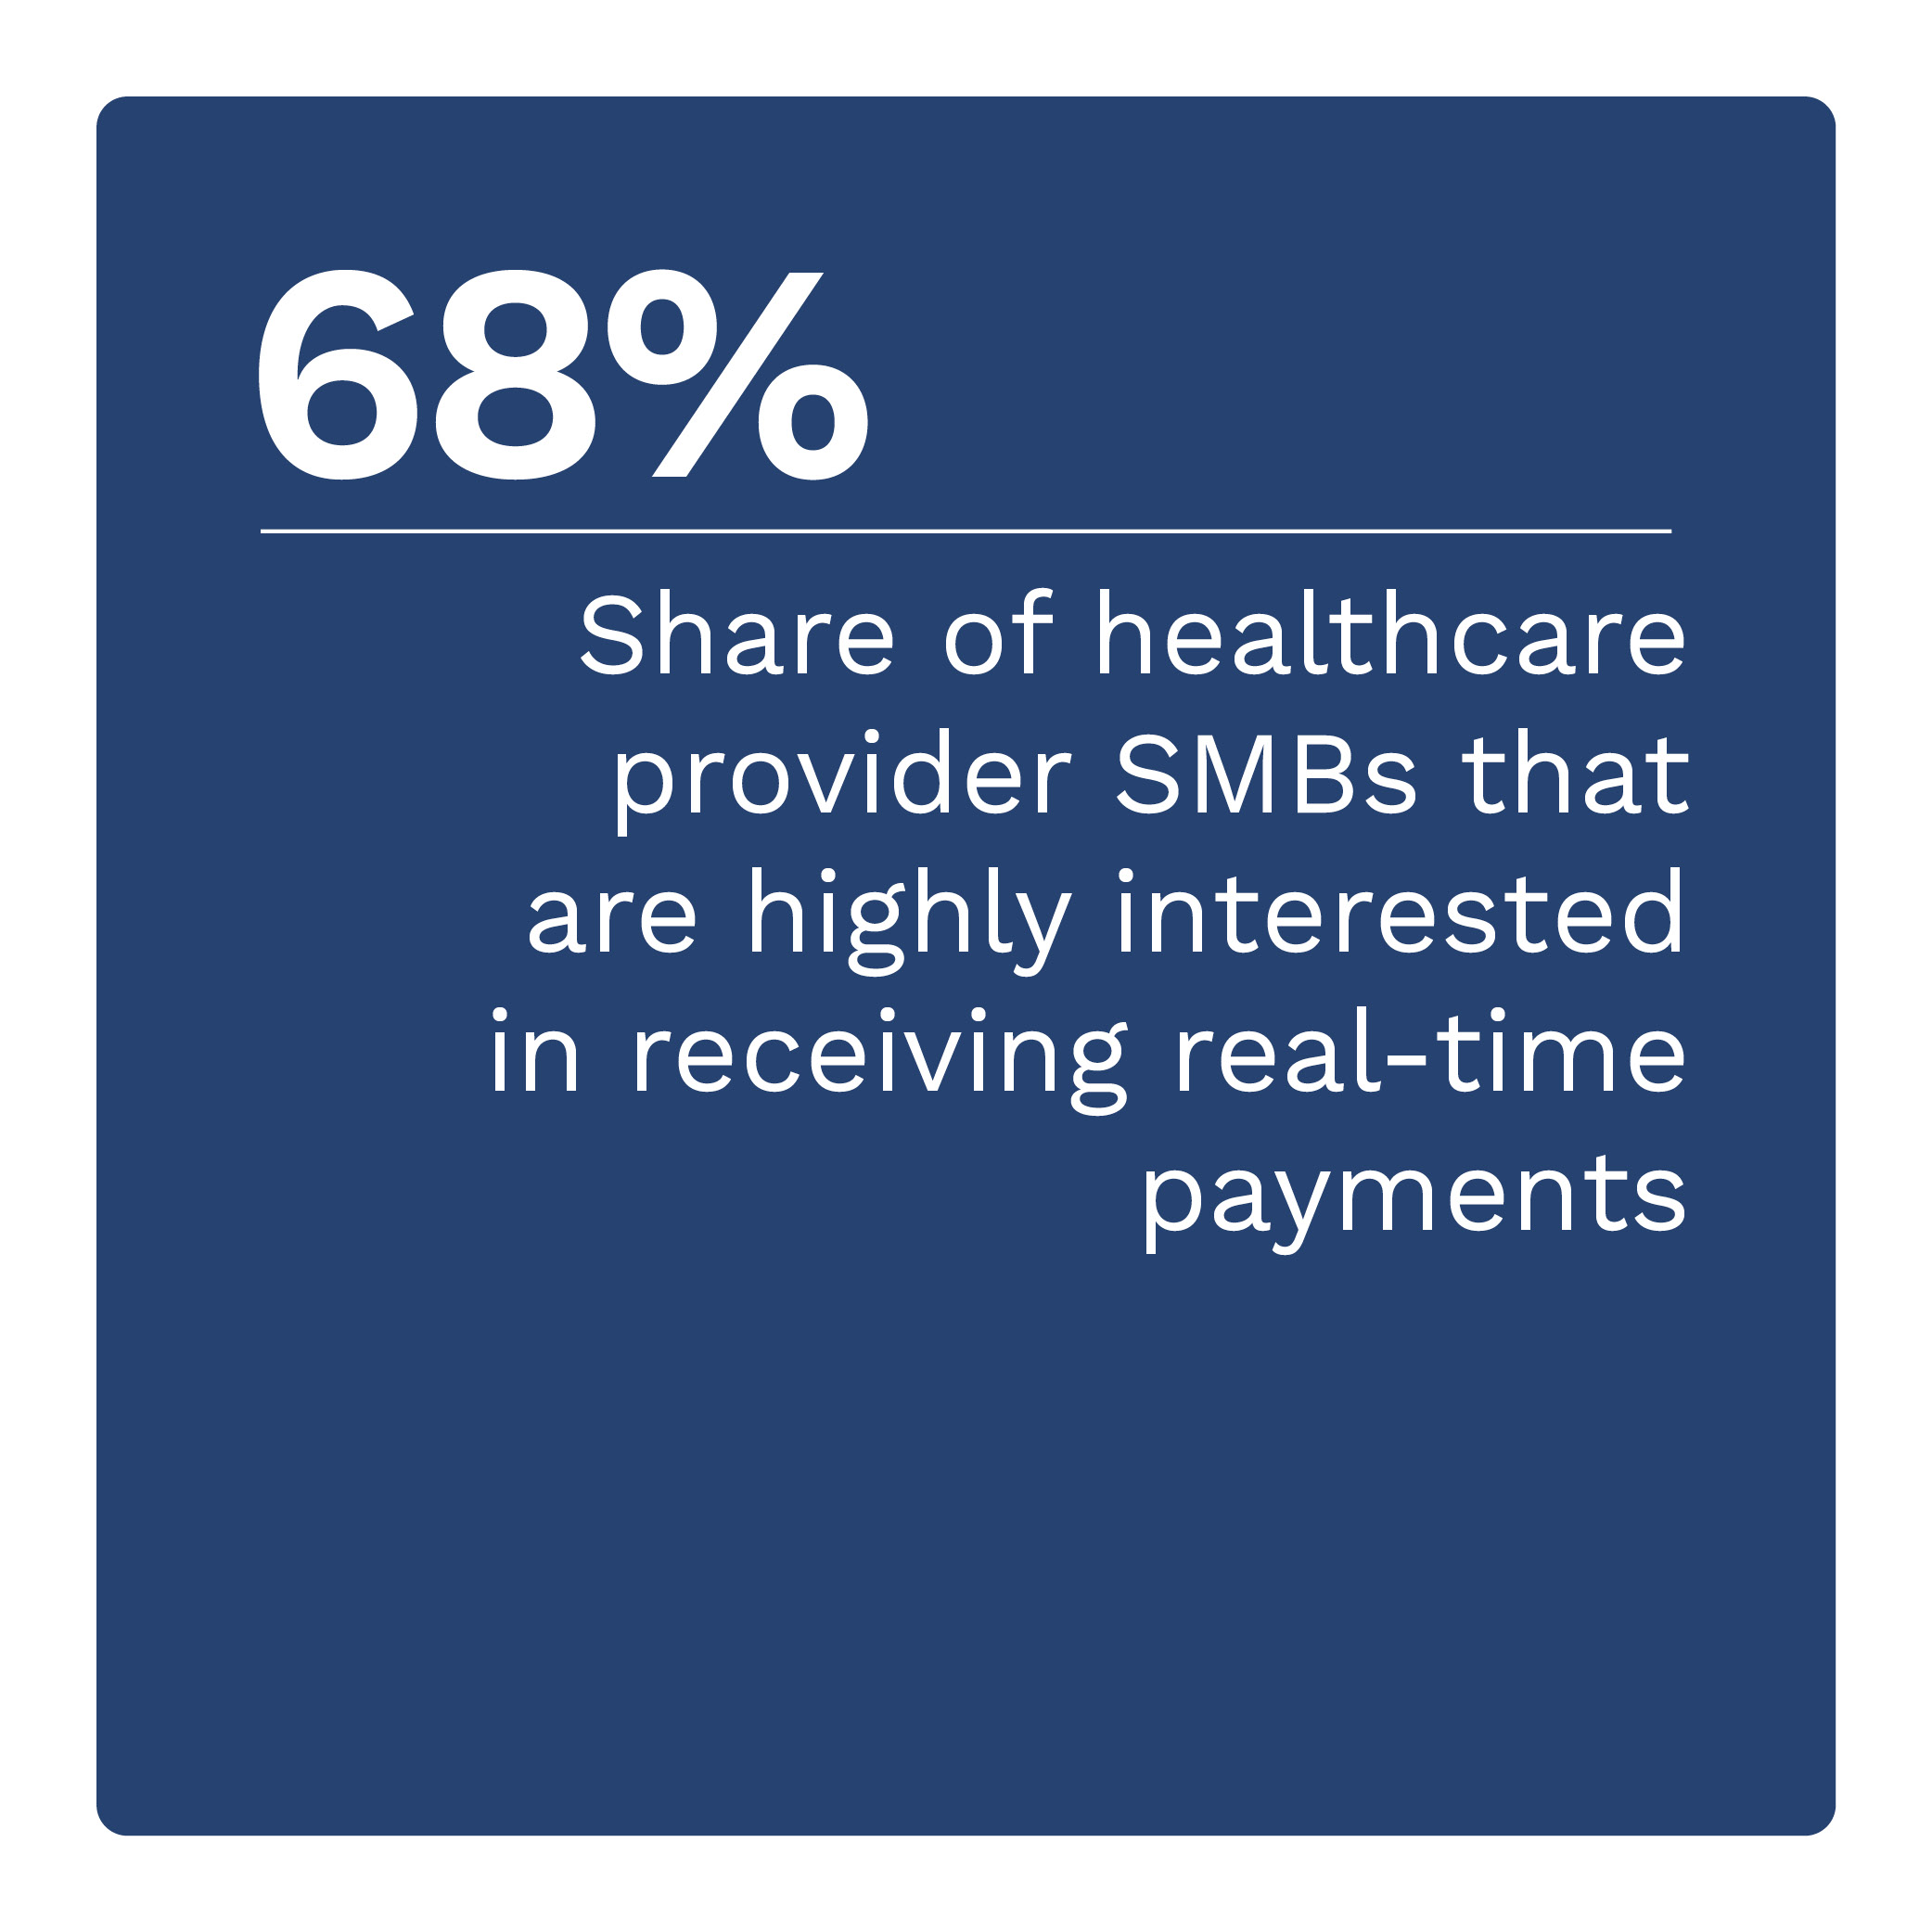 68%: Share of healthcare provider SMBs that are highly interested in receiving real-time payments